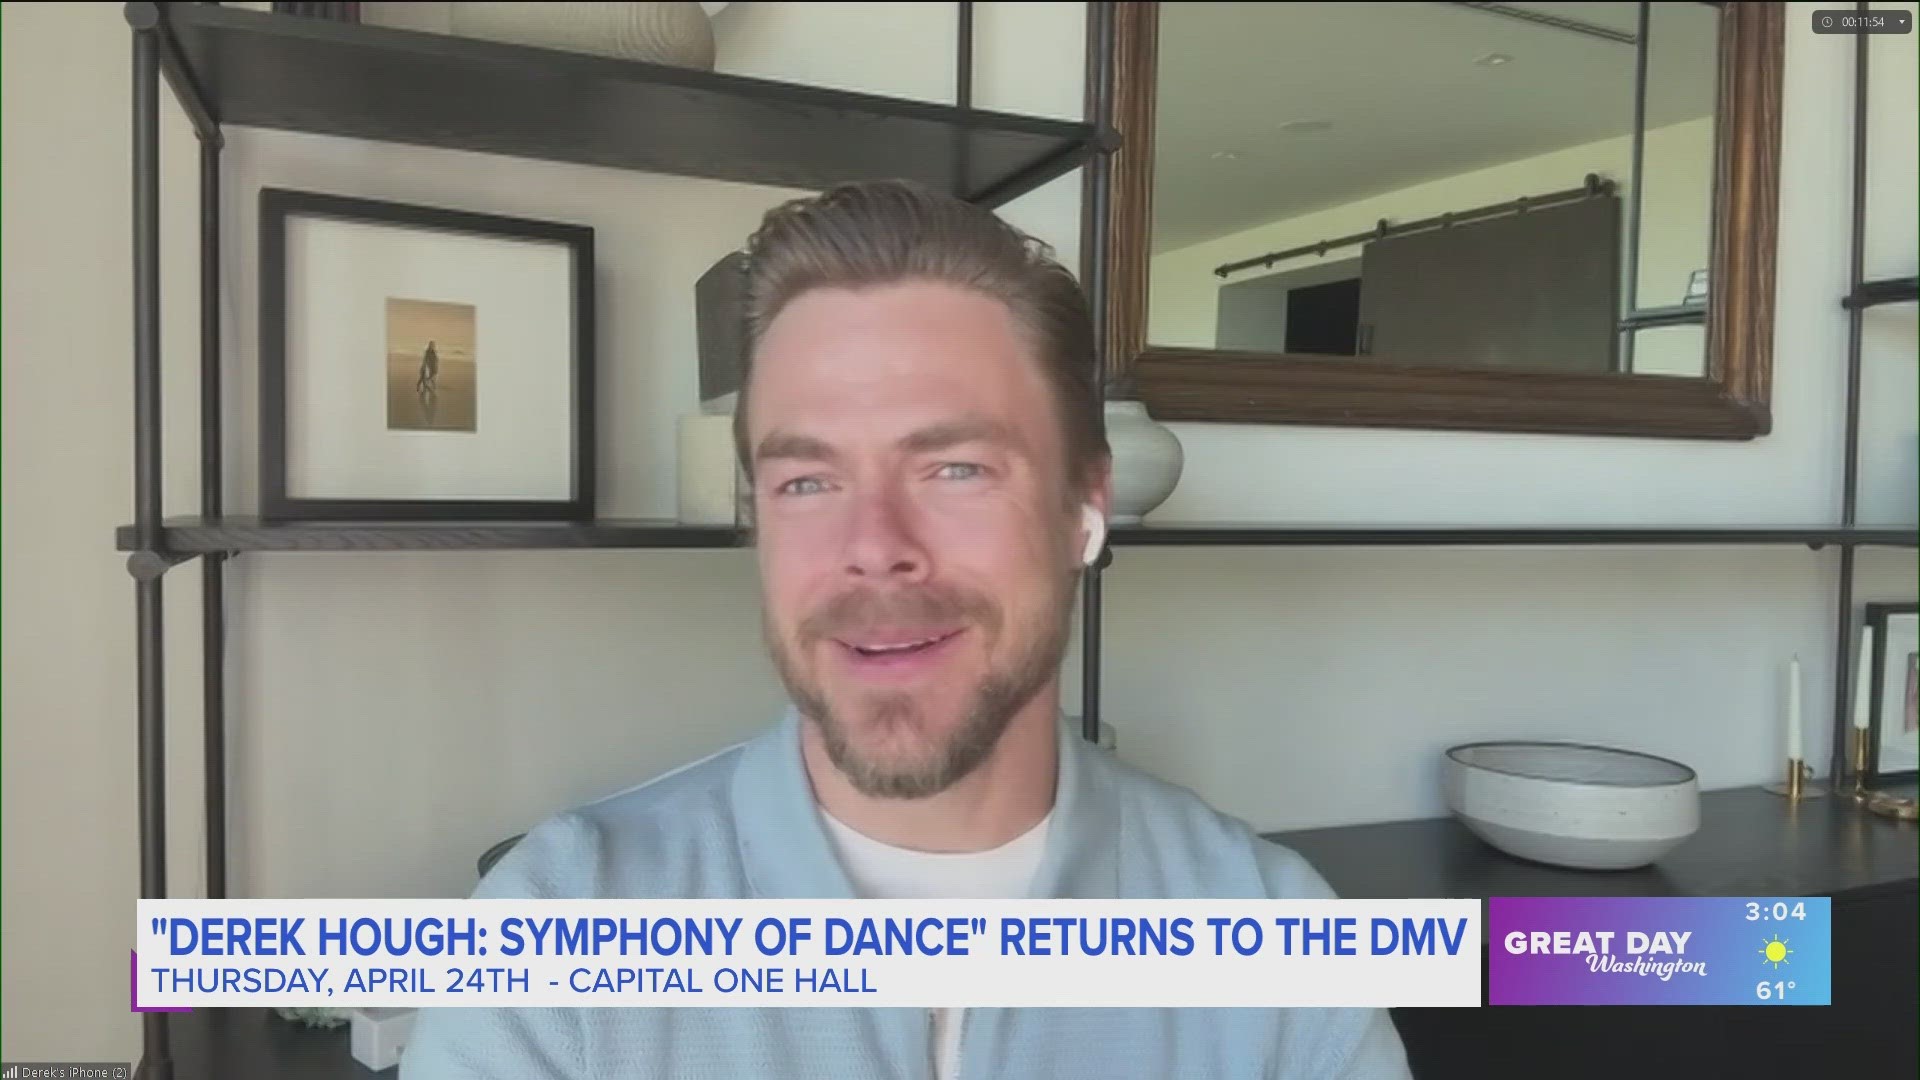 Emmy nominated dancer, Derek Hough, brings a special show to Capital One Hall during his 'Symphony of Dance Tour'.